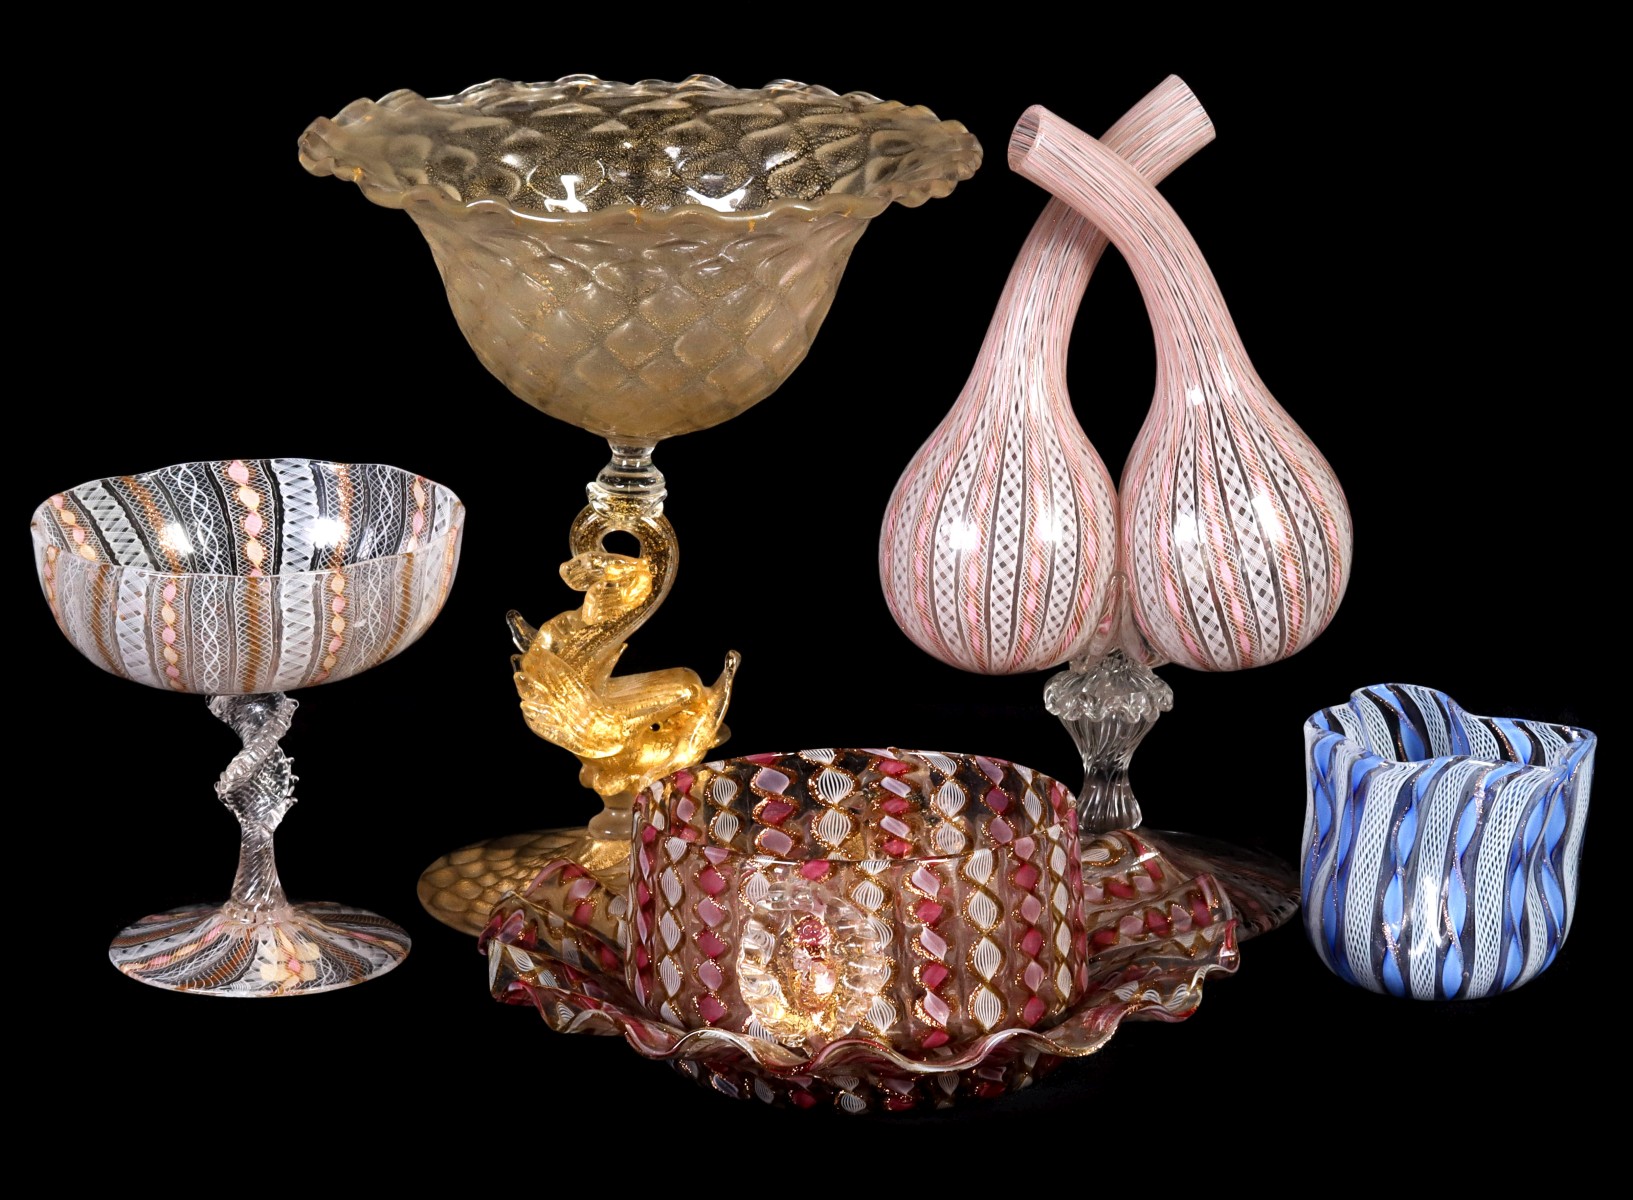 NICE EXAMPLES OF LATTICINO AND OTHER ITALIAN GLASS